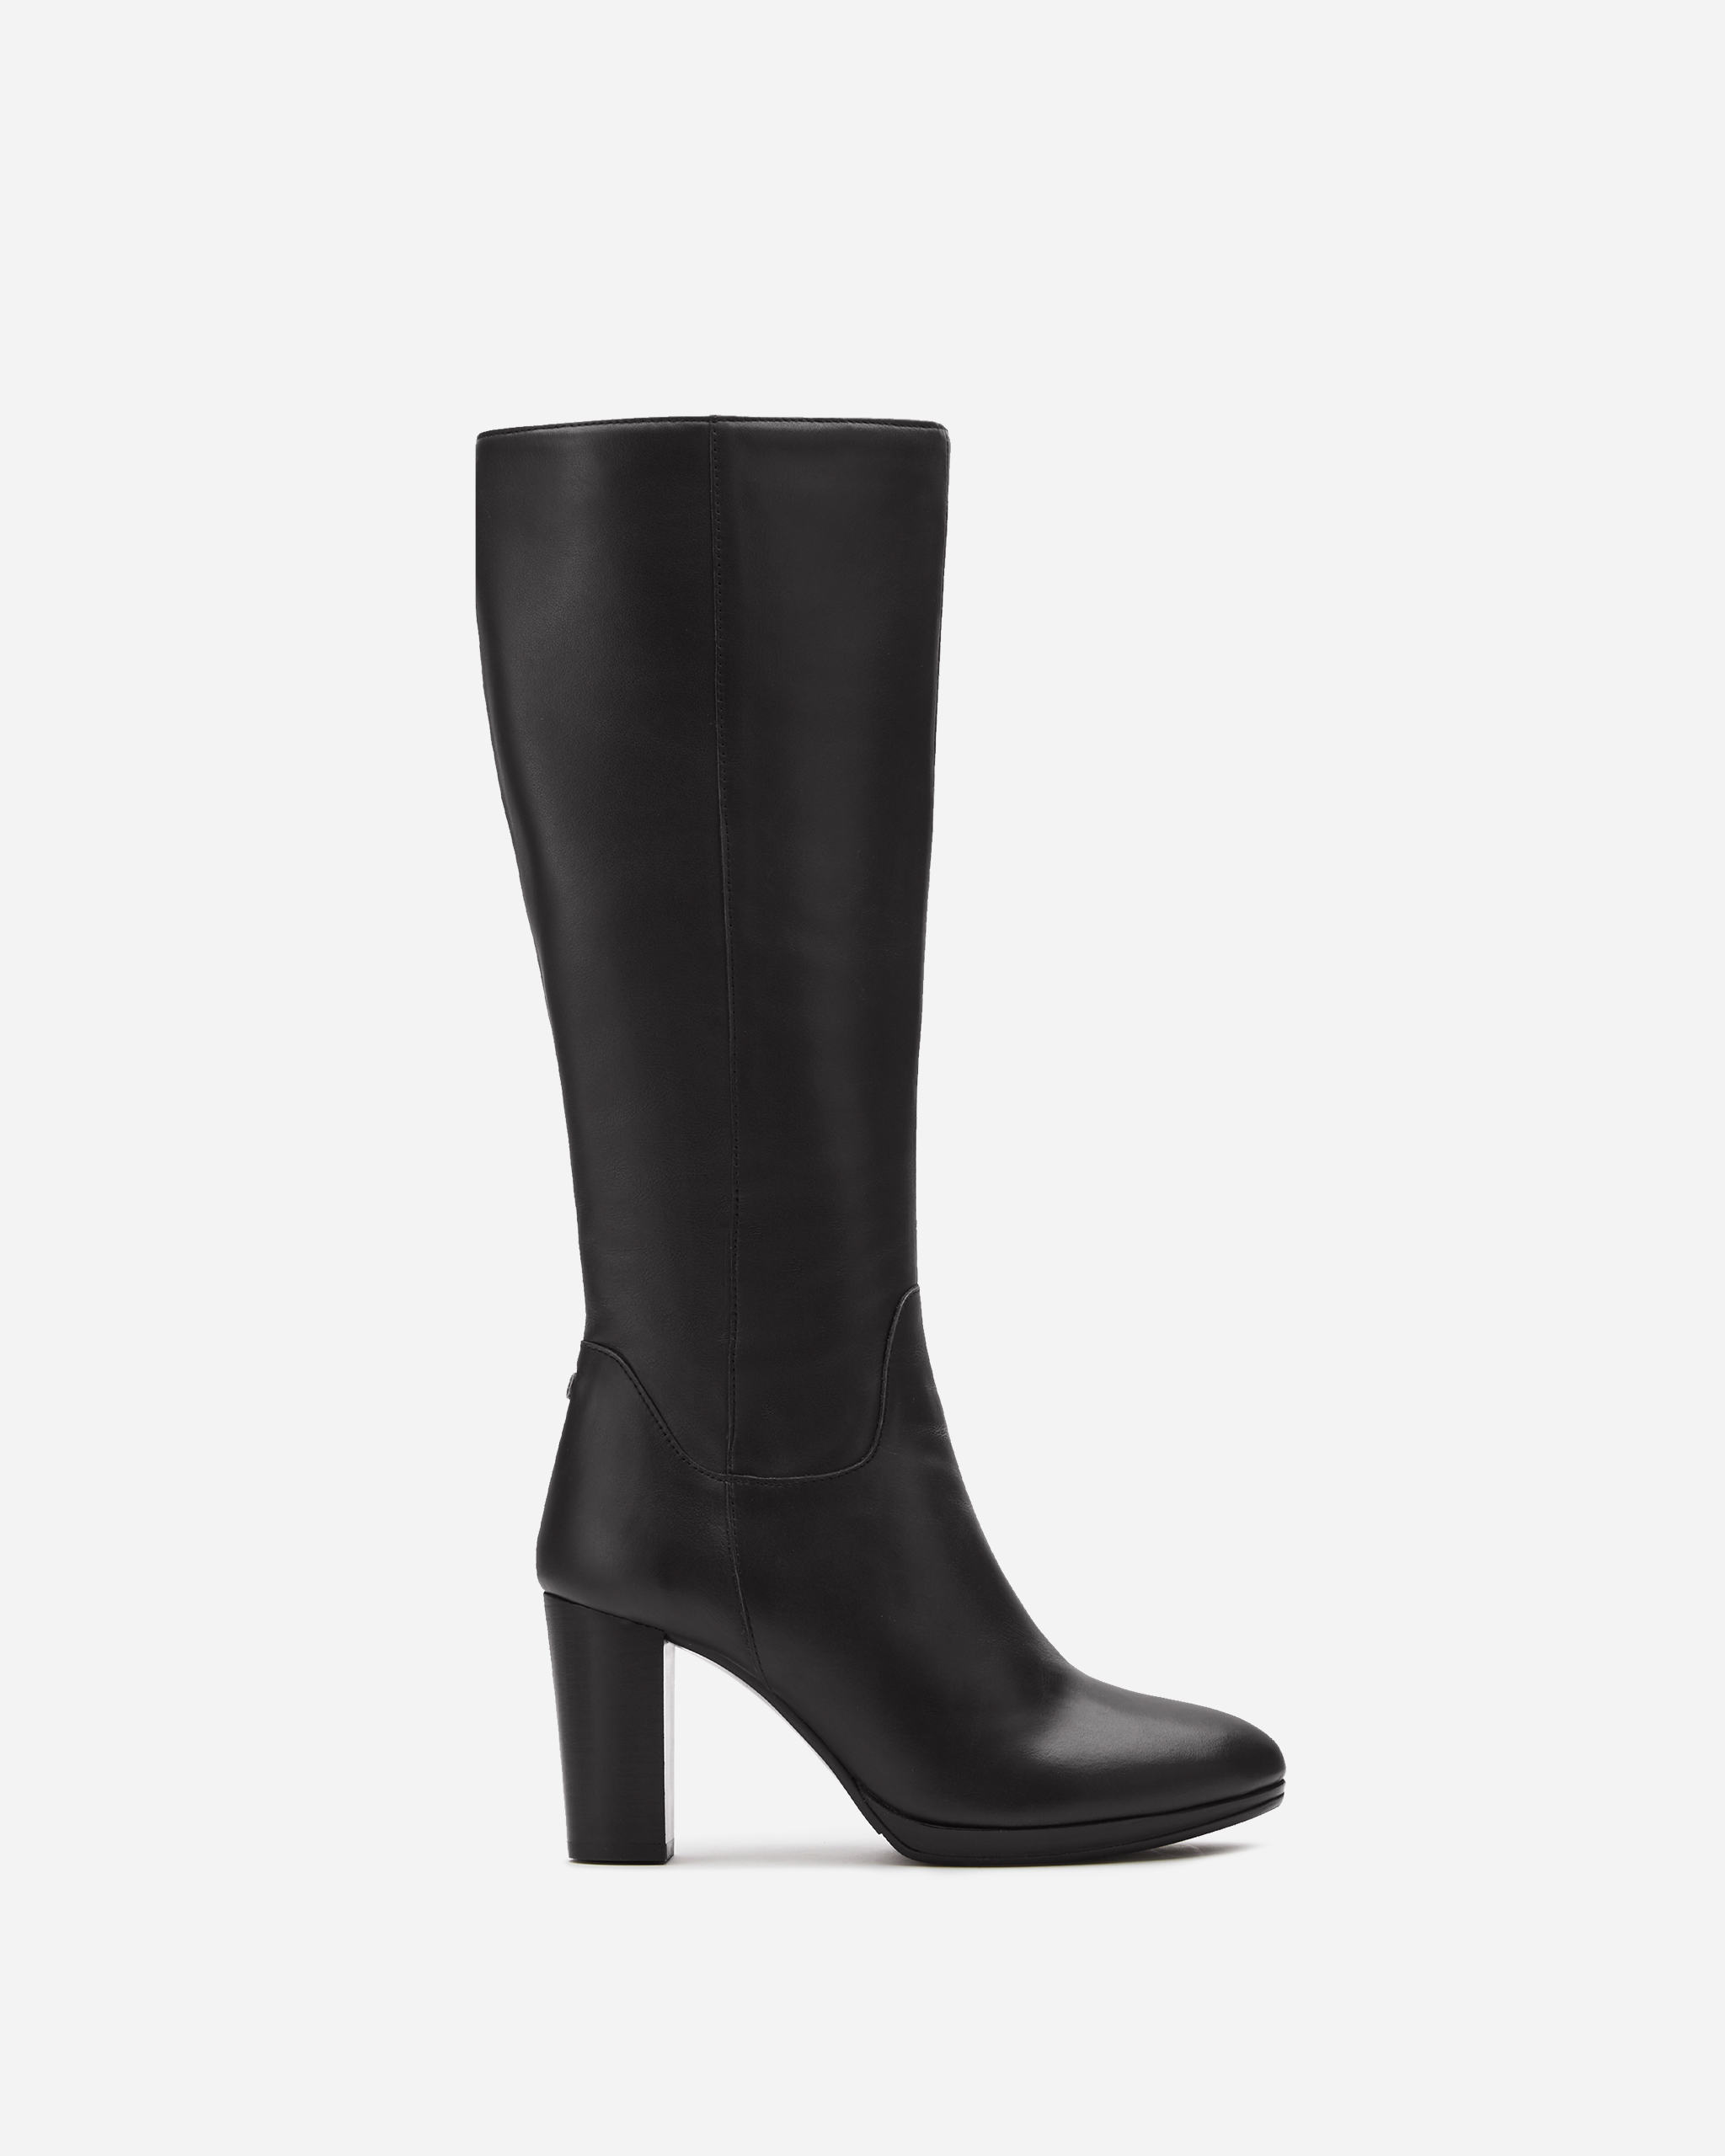 black leather heeled boot